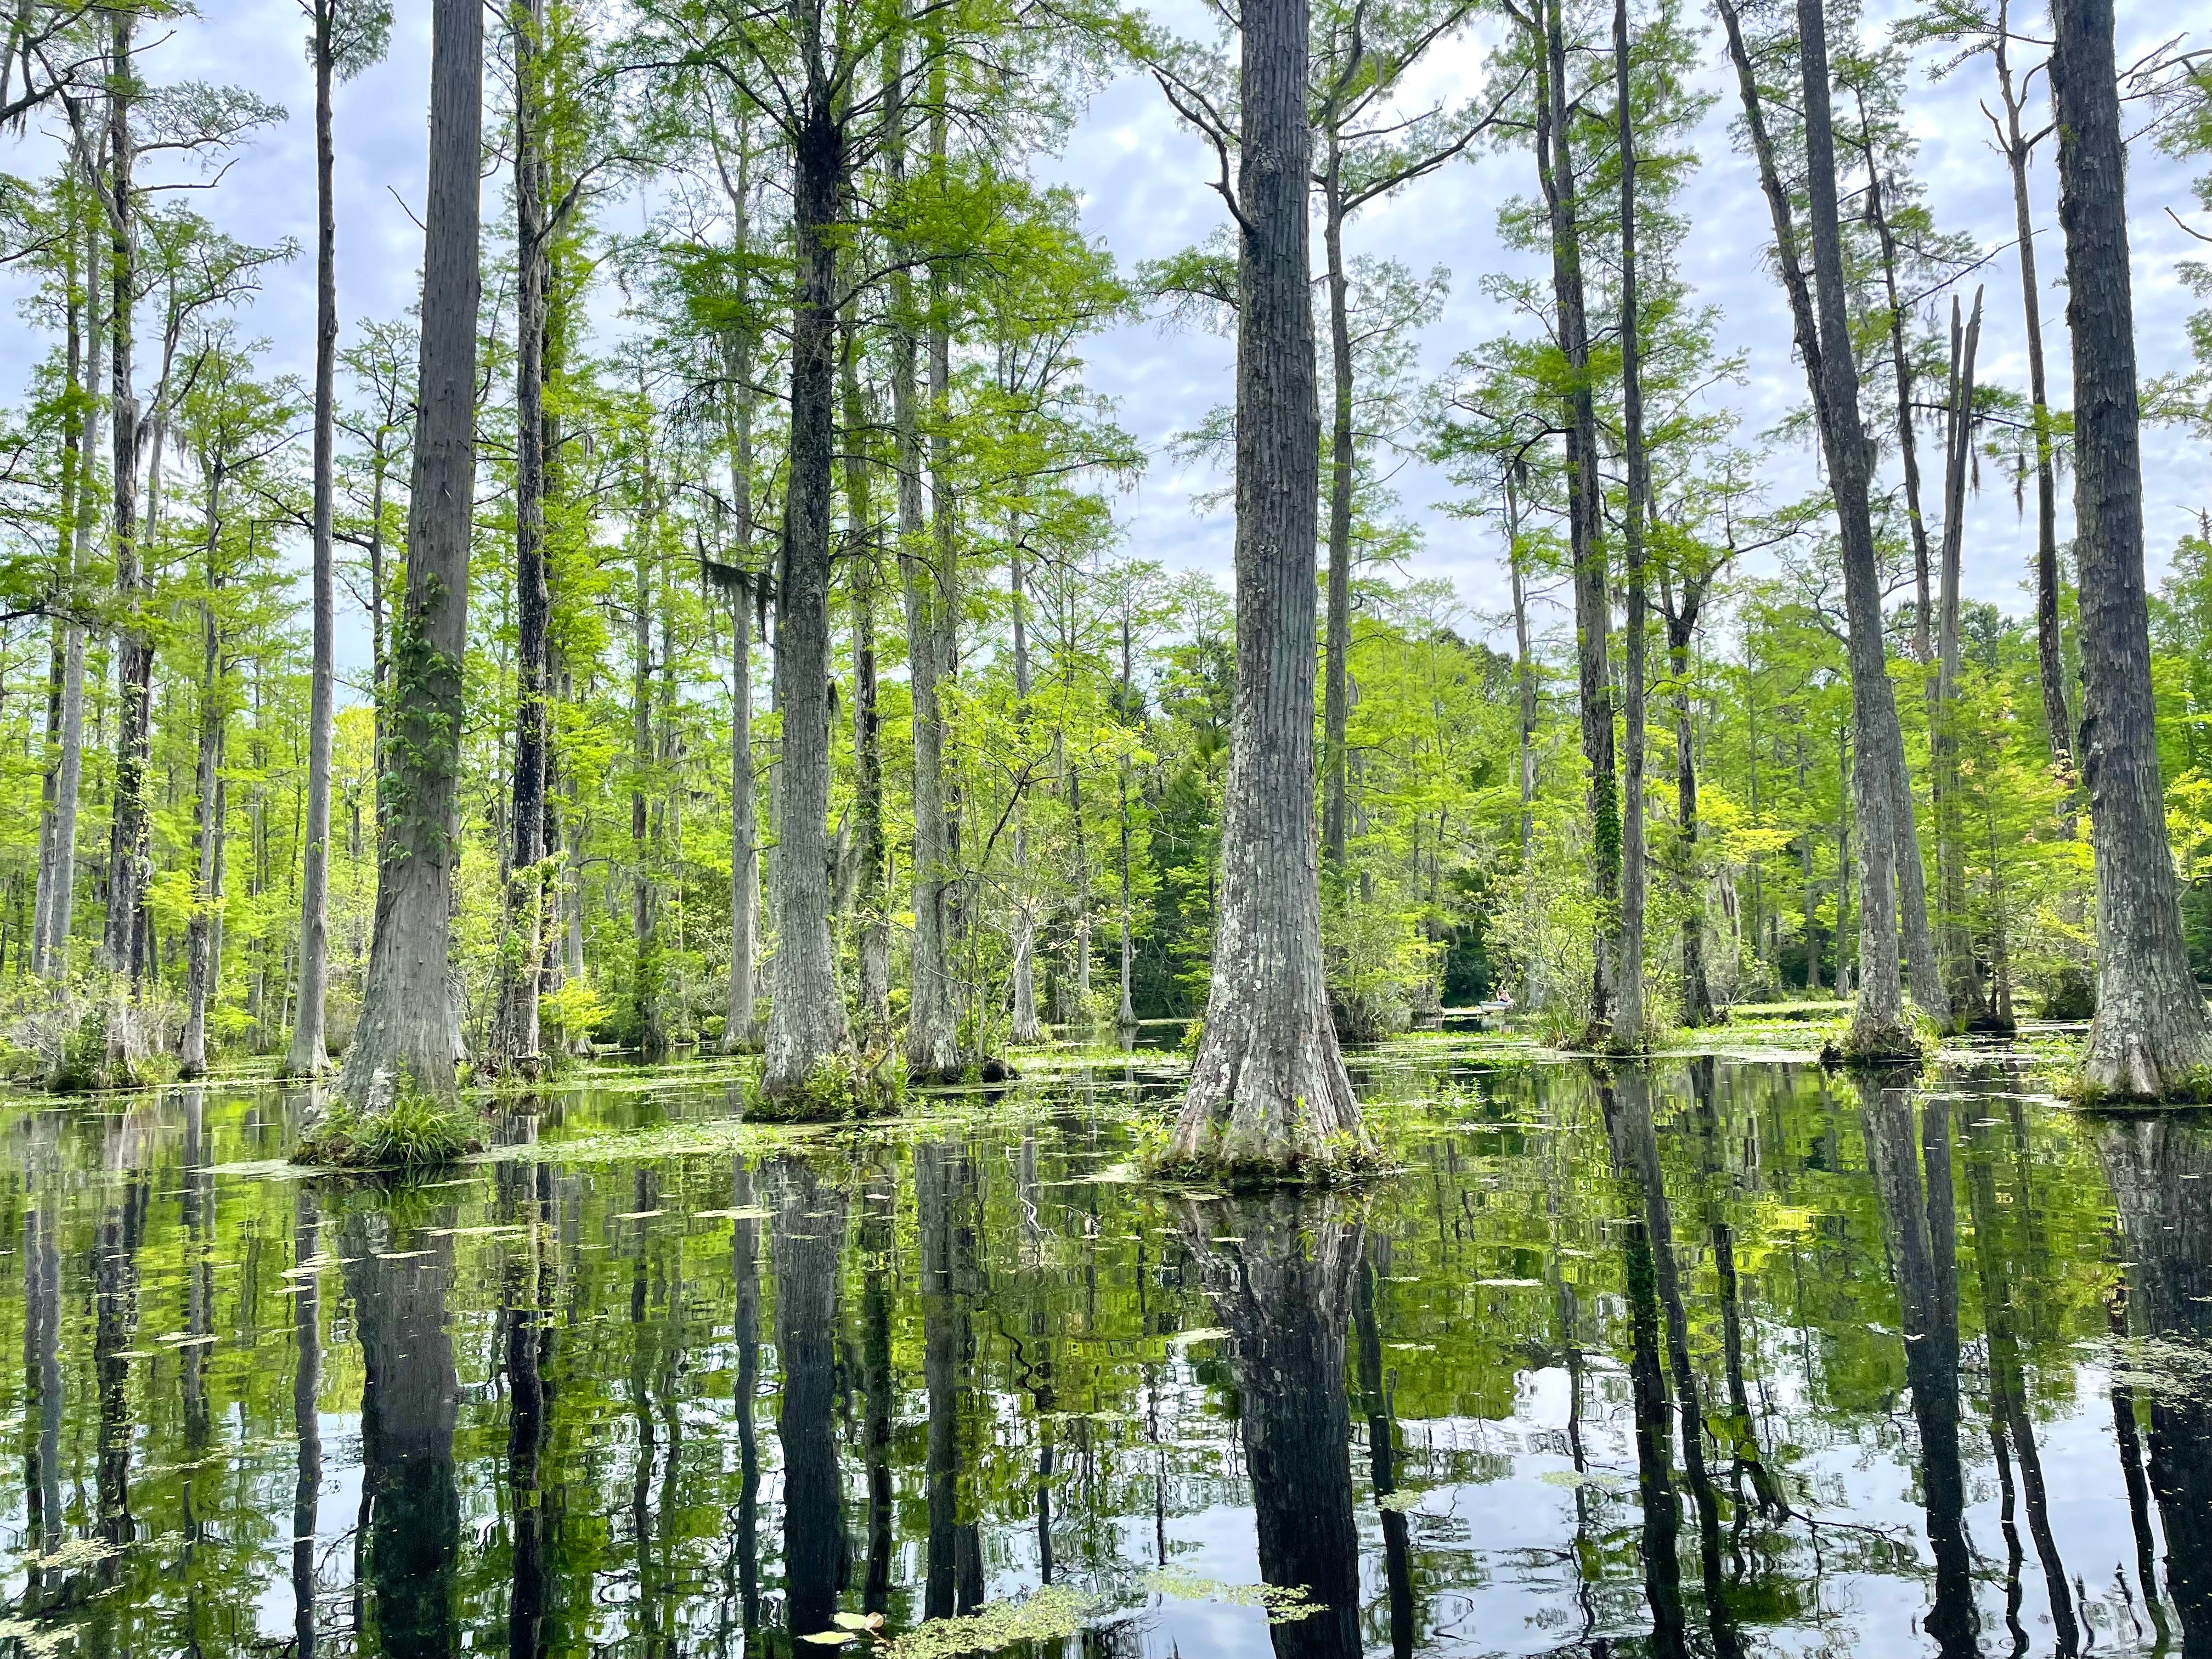 You can take a boat ride through the waters of Cypress Gardens just like Noah and Allie